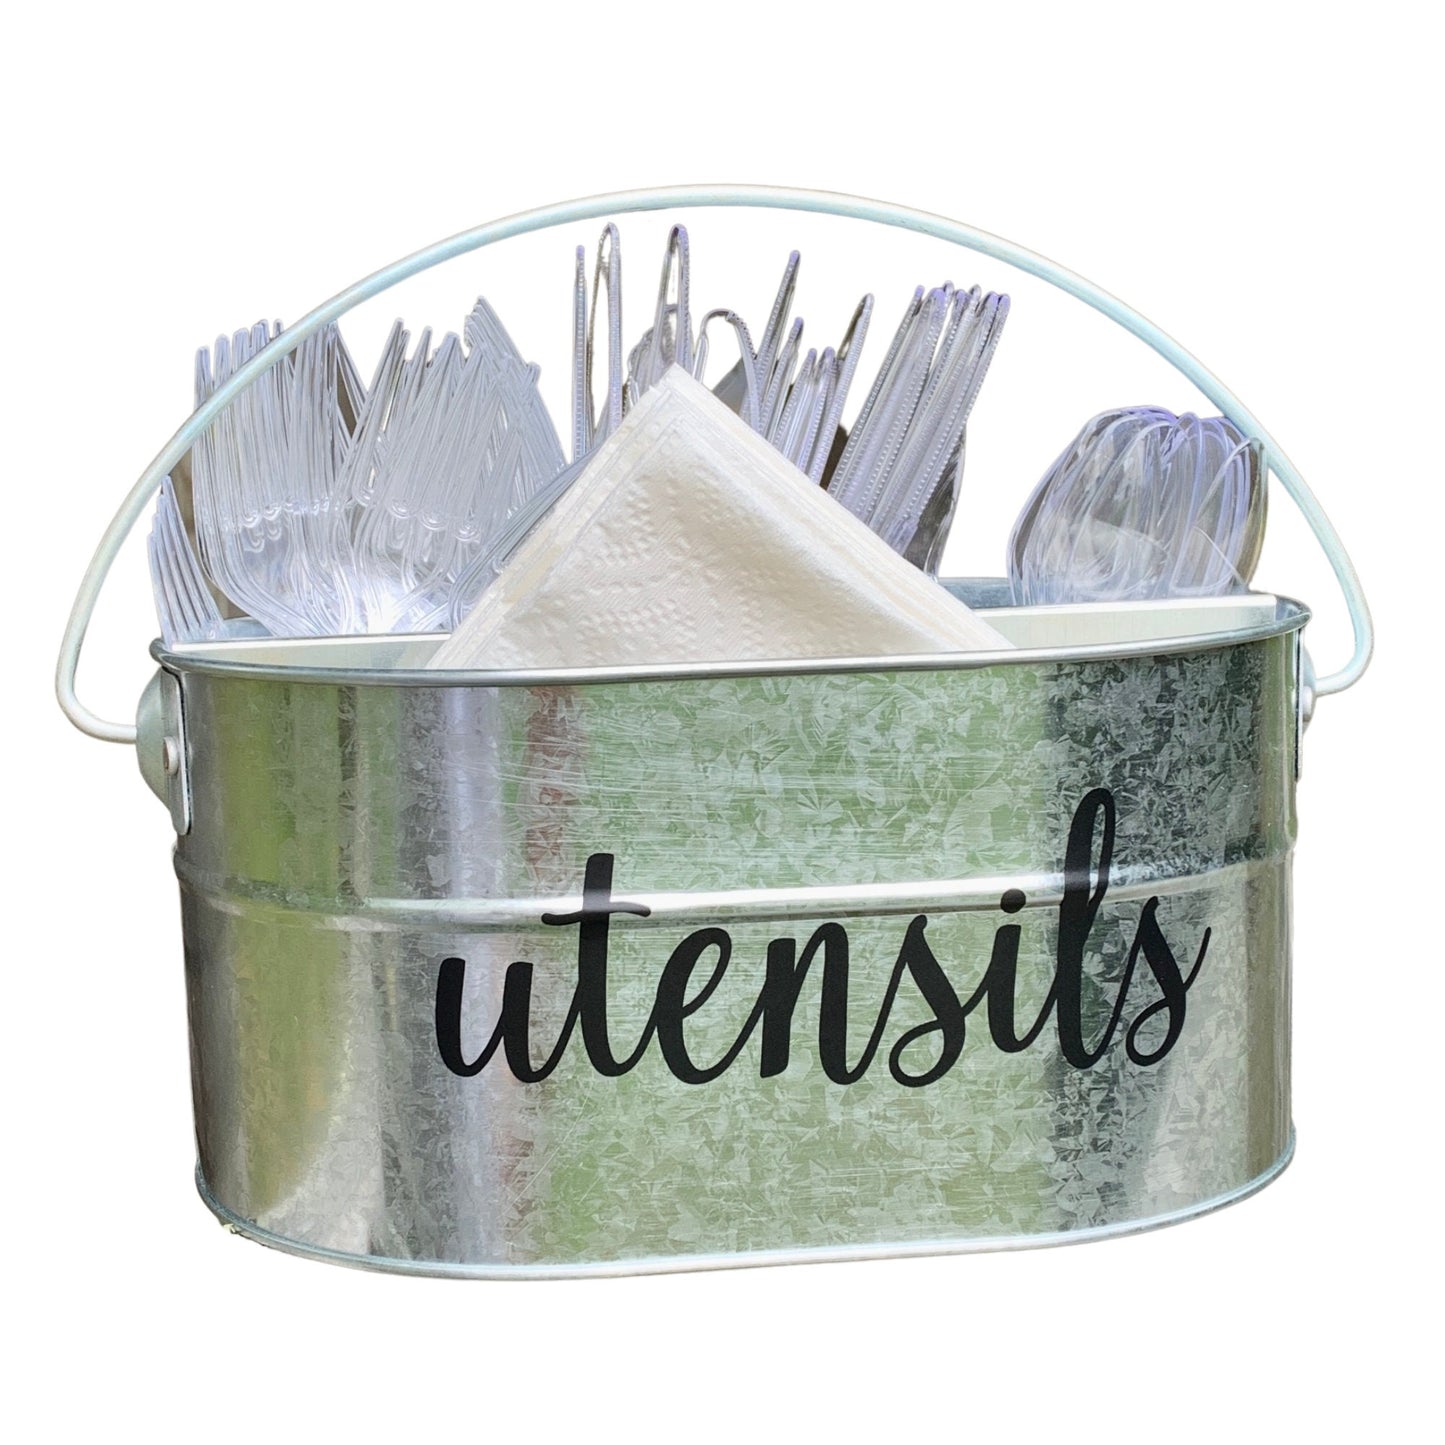 Utensil Caddy-Personalized and Customized | BBQ Organizer for Utensils